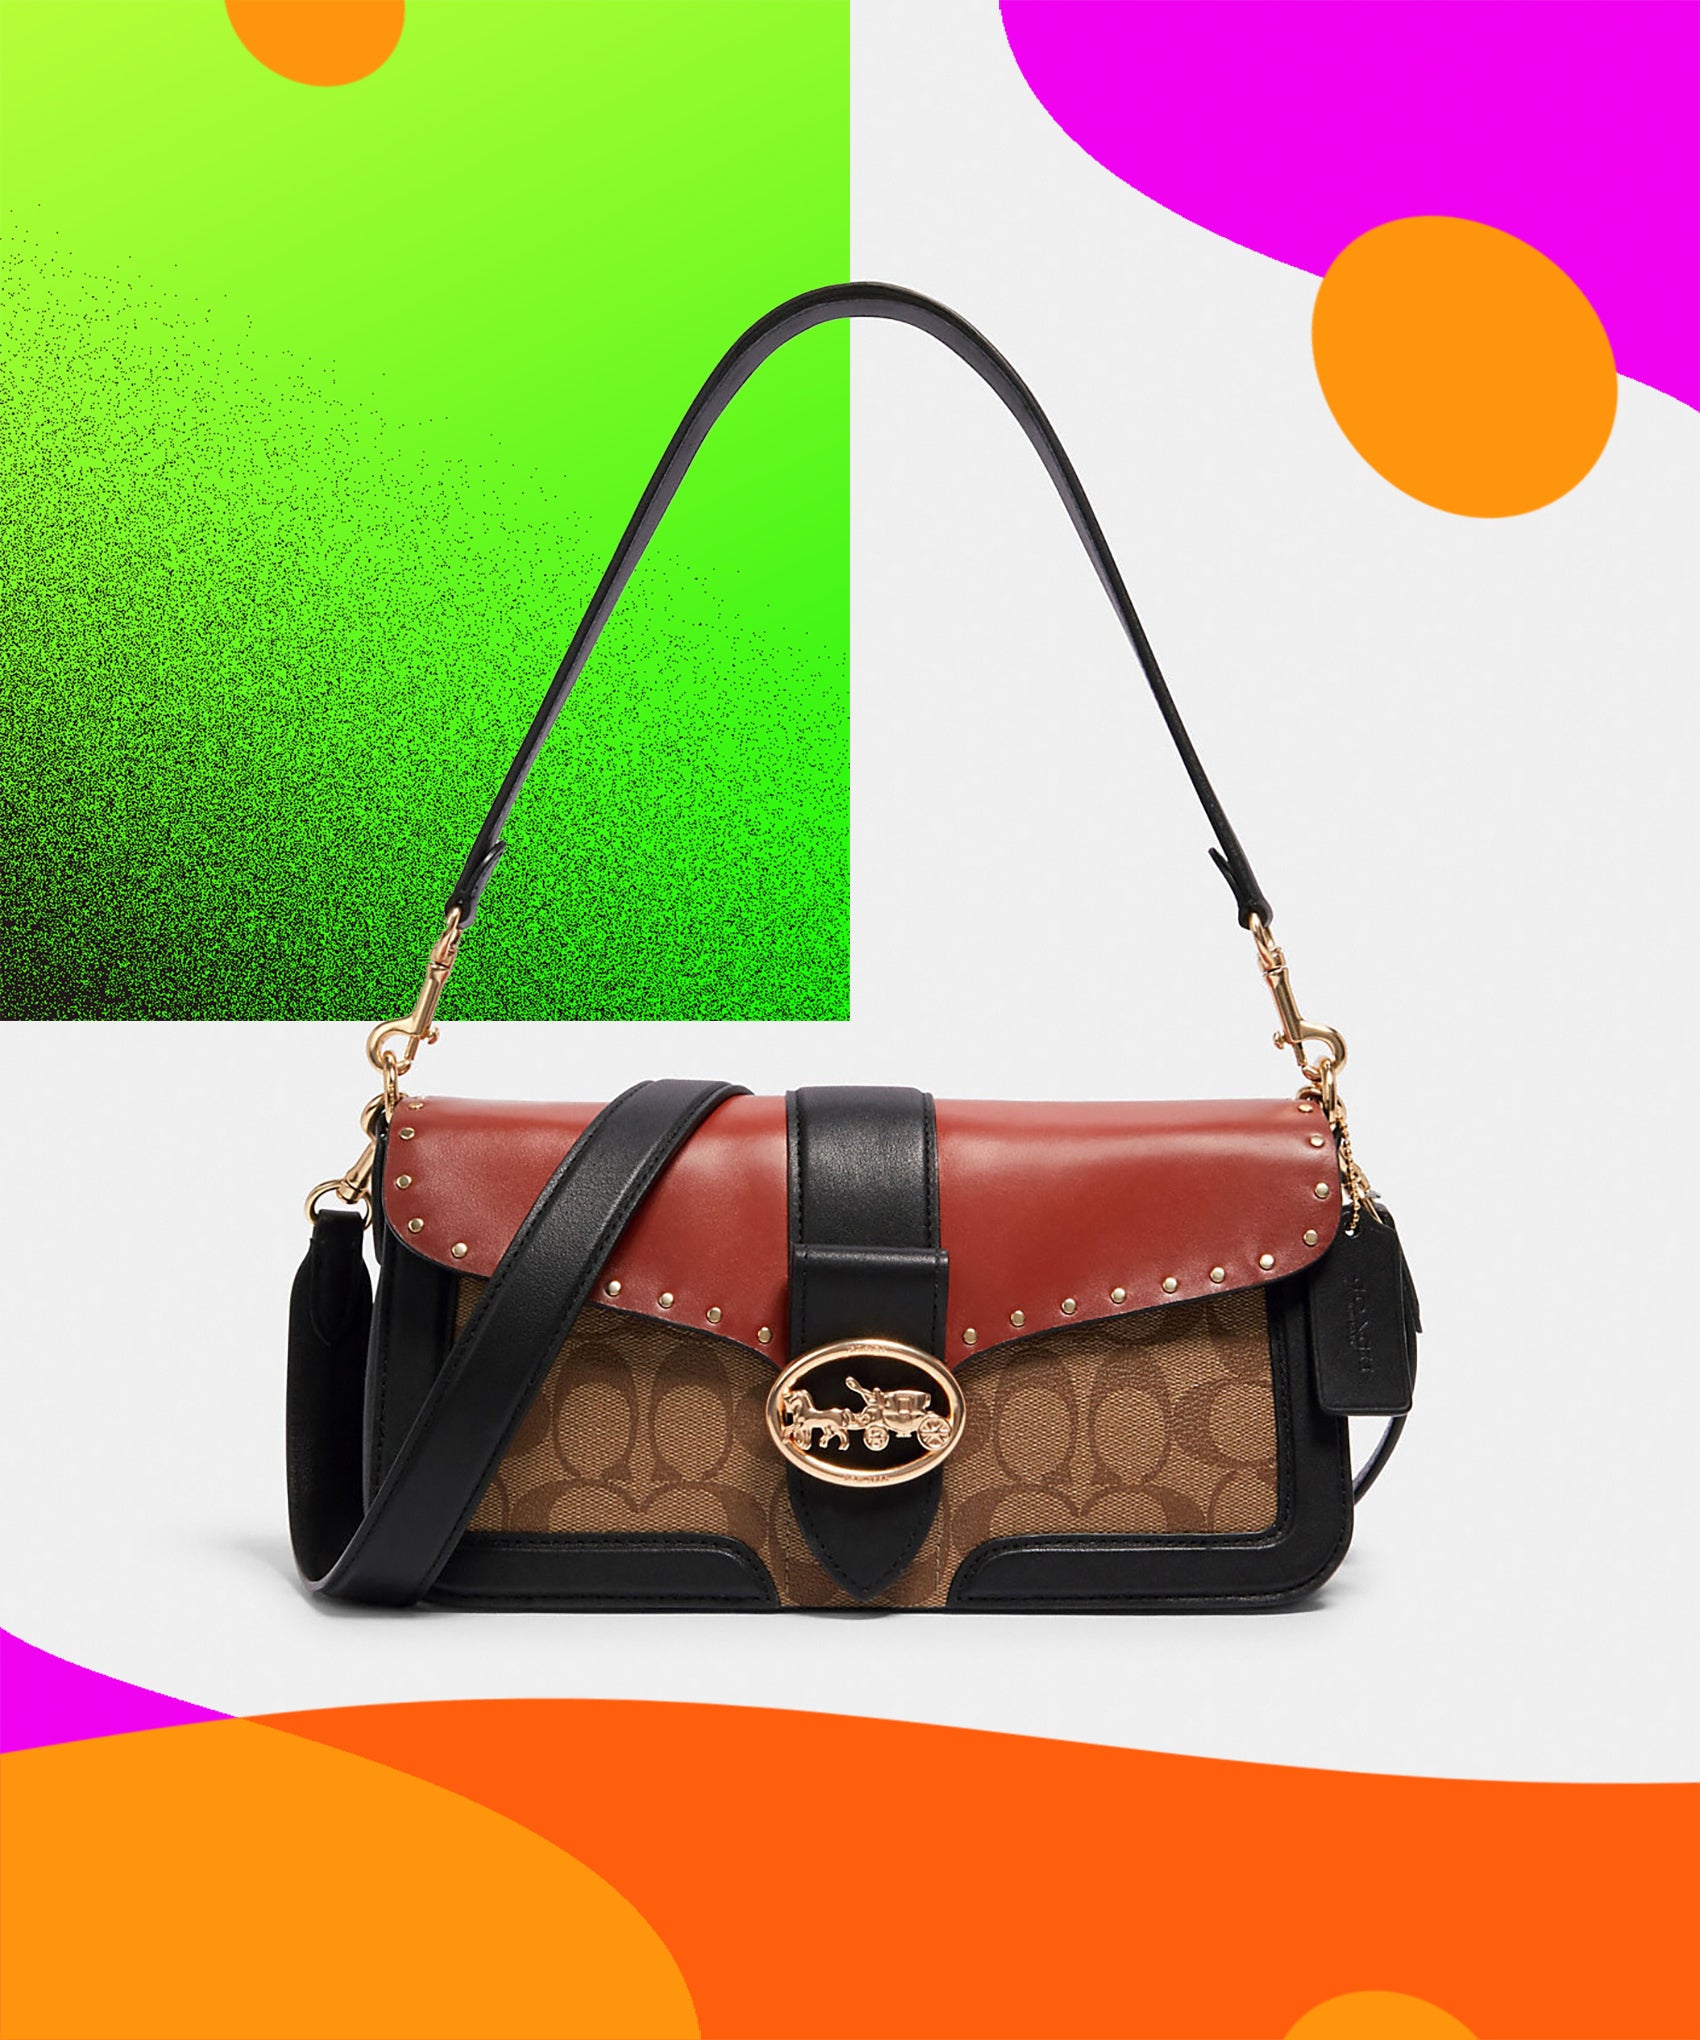 Coach purse: Shop Coach Outlet now for big savings on purses and more